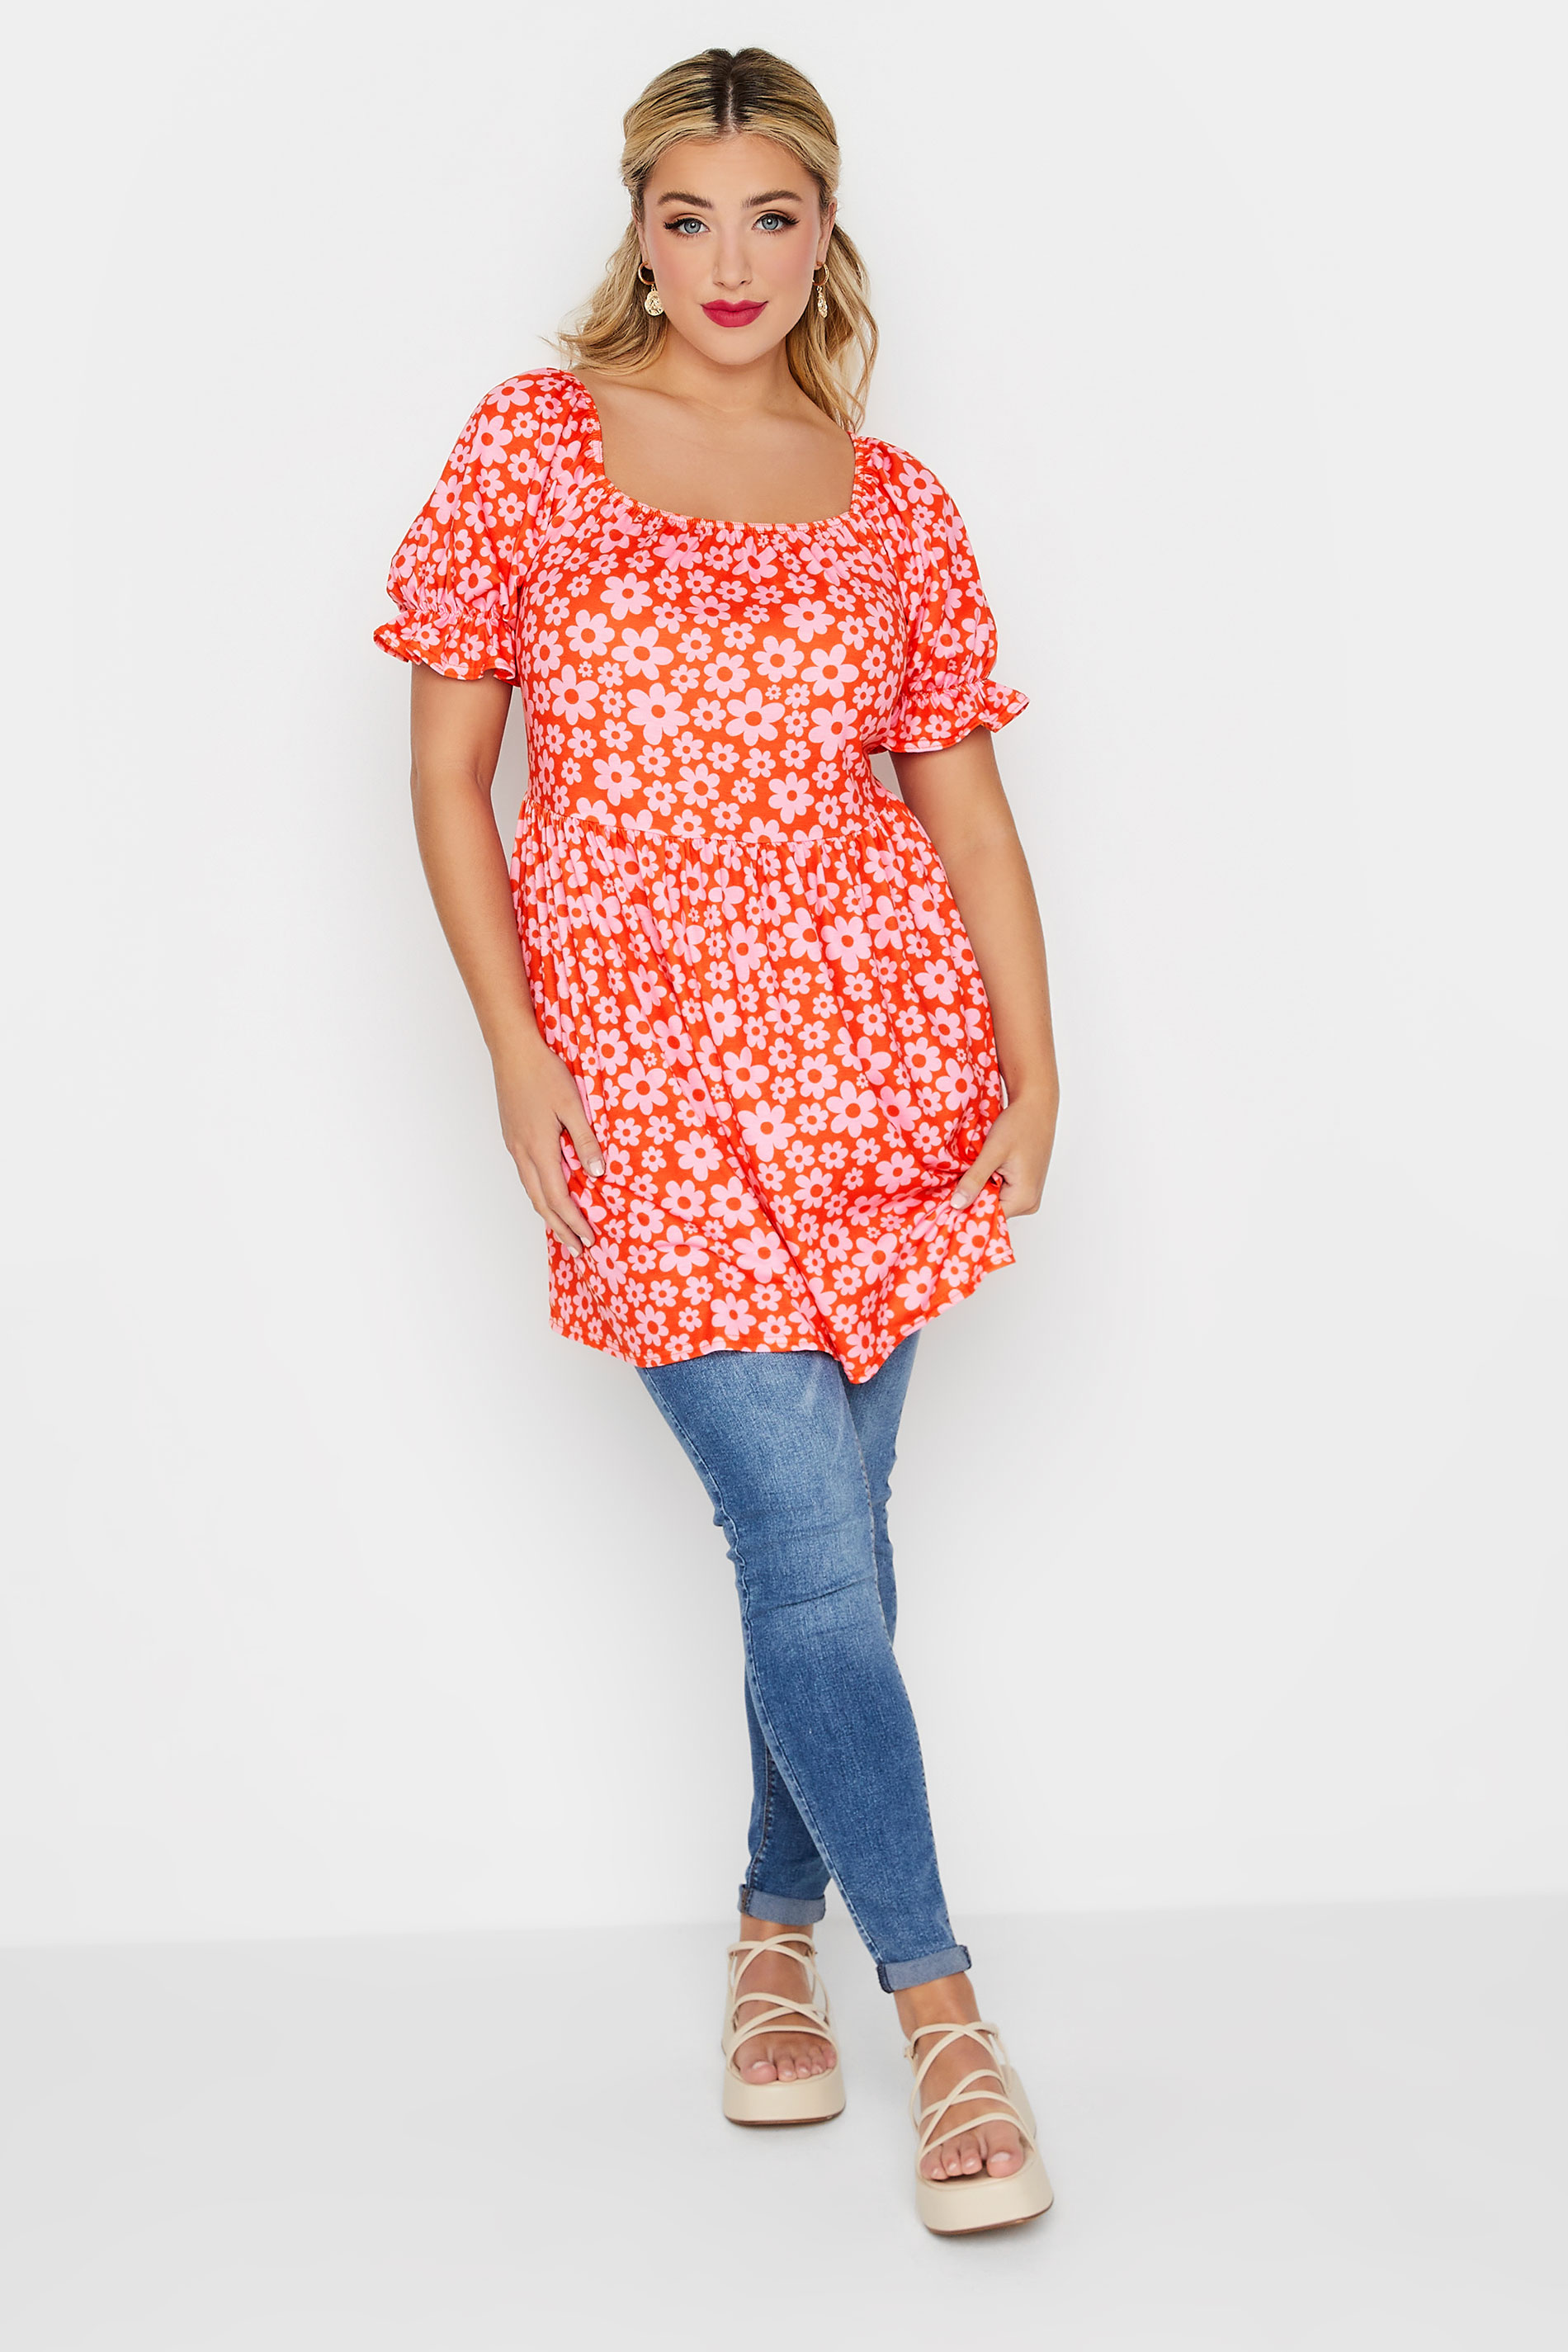 YOURS Plus Size Pink Retro Floral Print Top | Yours Clothing  2